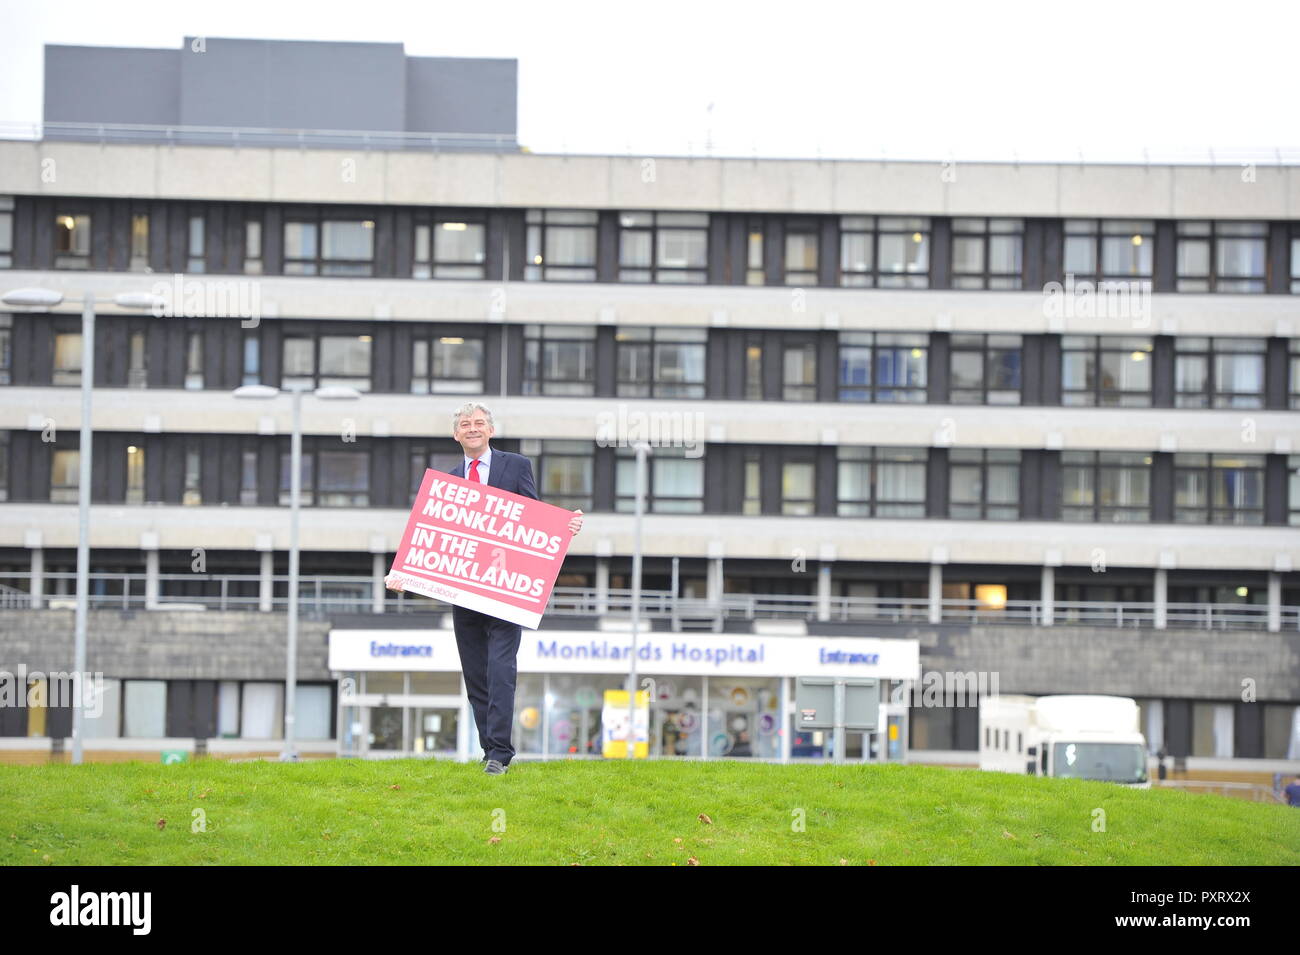 Glasgow, UK. 24th October 2018, Airdrie, Glasgow, UK. 'Keep The Monklands In The Monklands'.  Richard Leonard - Leader of the Scottish Labour Party pictured in front of University Monklands Hospital in a bid to commit to keeping the NHS Lanarkshire Trust hospital in the Monklands community. Credit: Colin Fisher/Alamy Live News Stock Photo